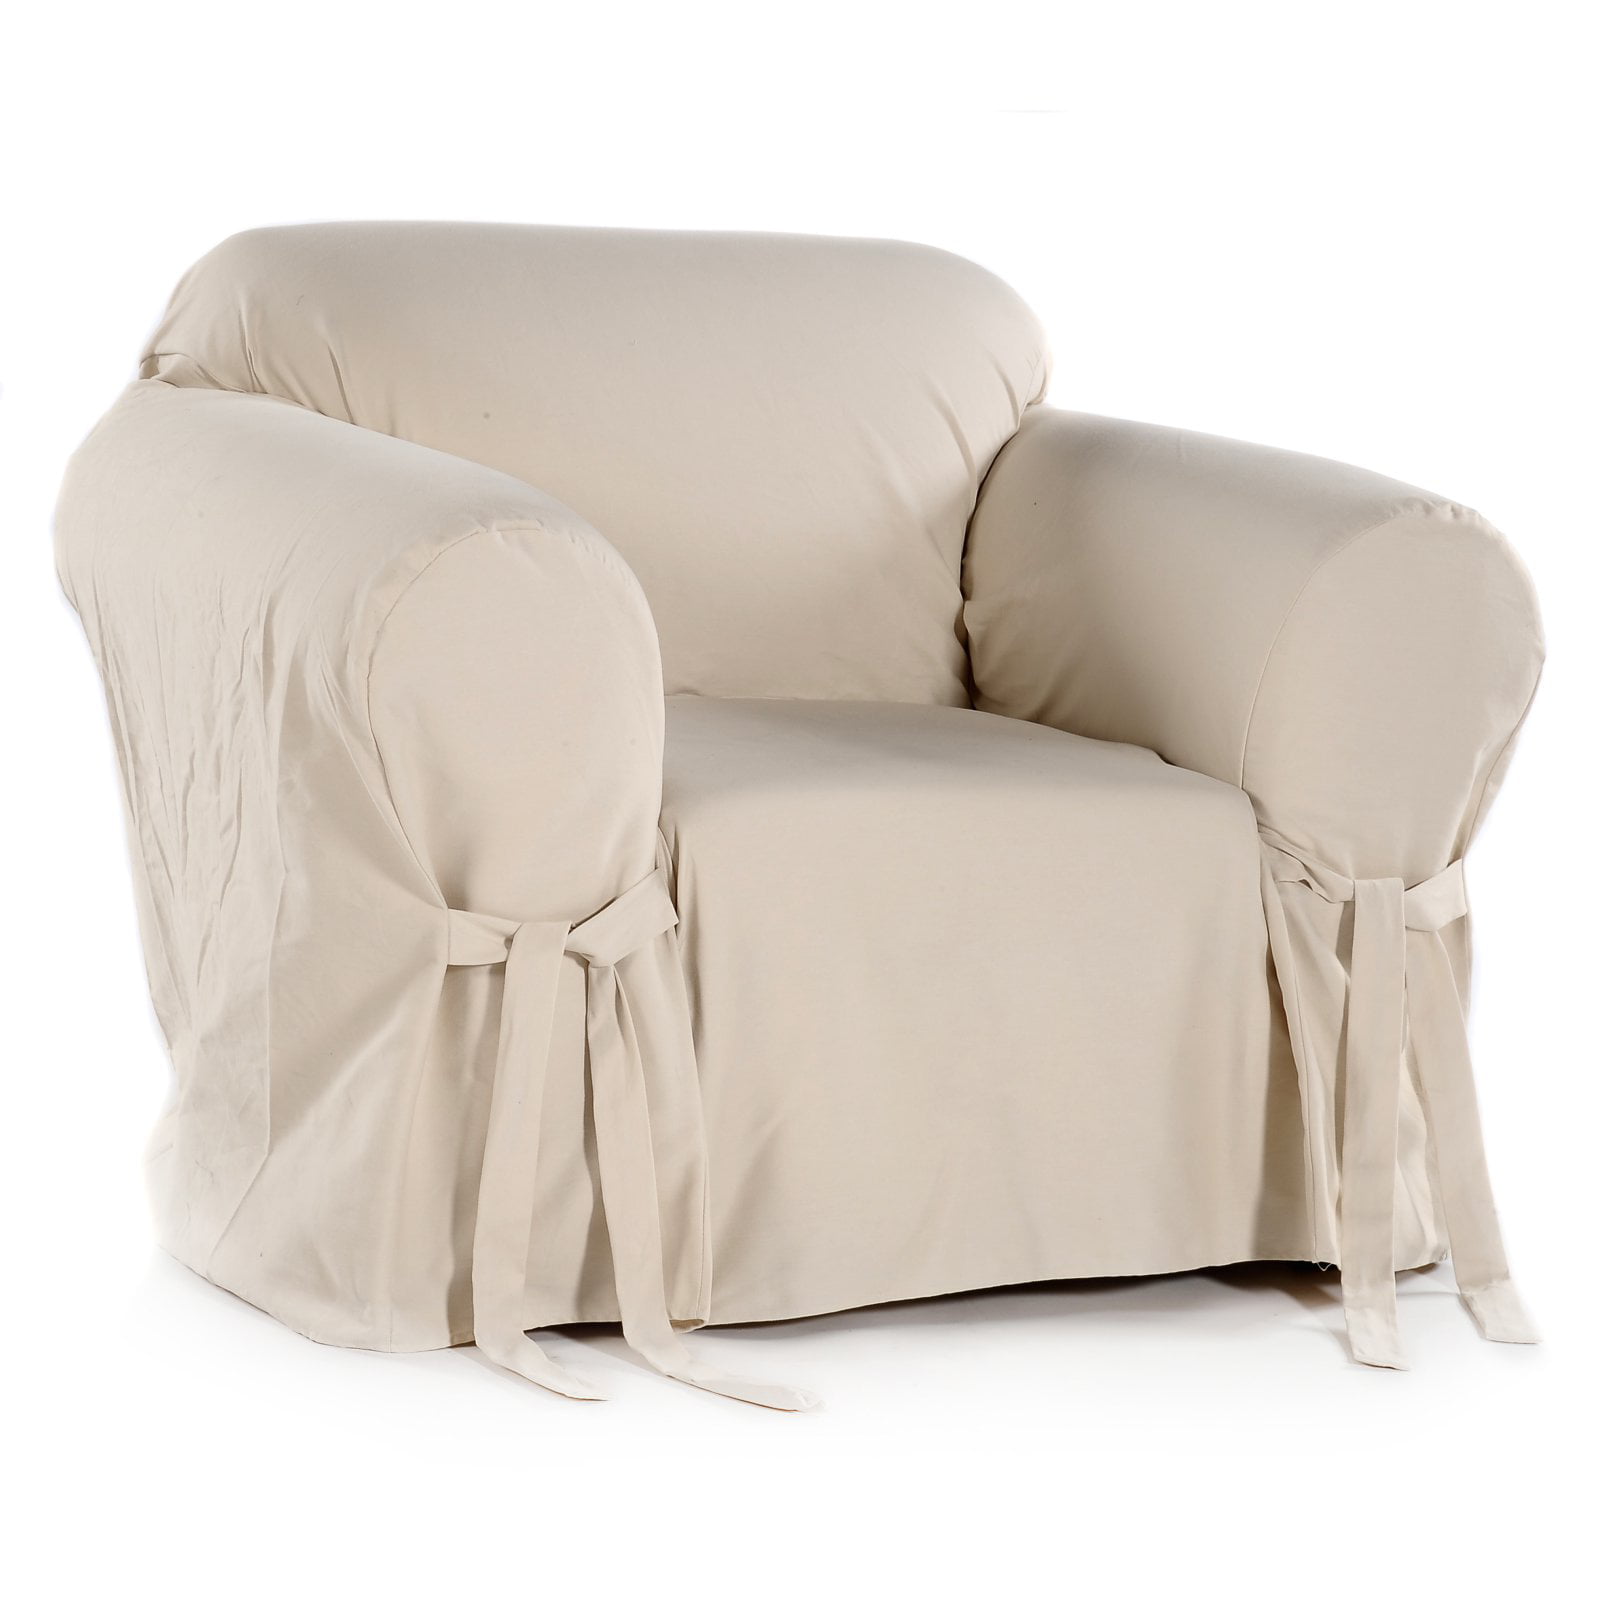 Classic Slip Covers 1-Piece Cotton Chair Slipcover With Bowties